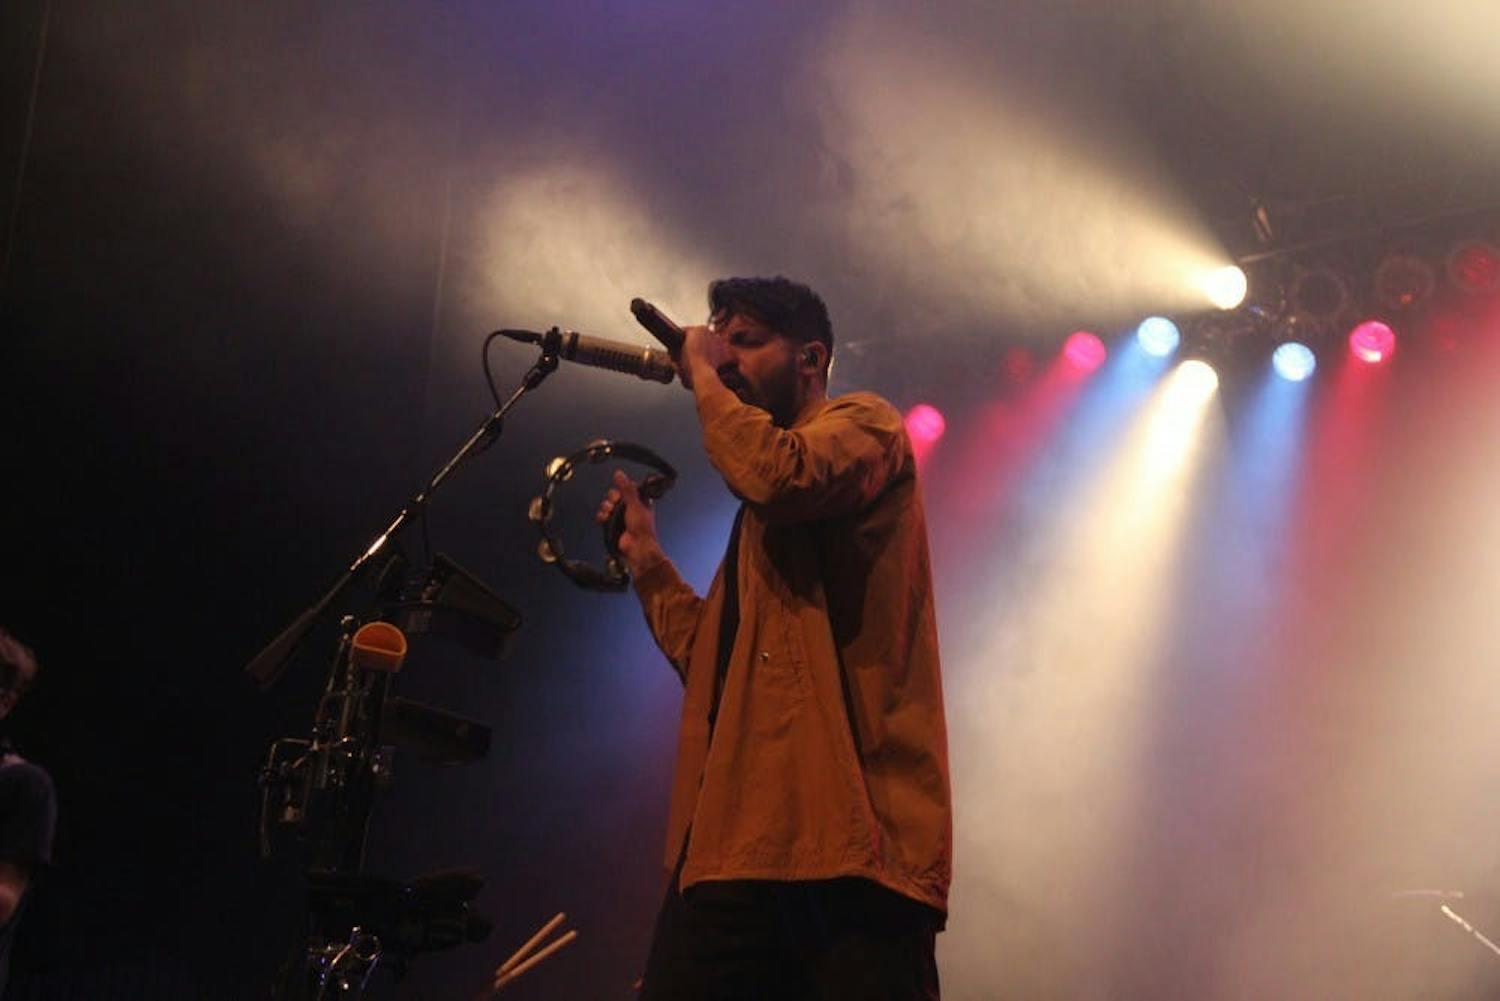 Sameer Gadhia, frontman of Young the Giant, played tambourine at Fall Fest in 2019.